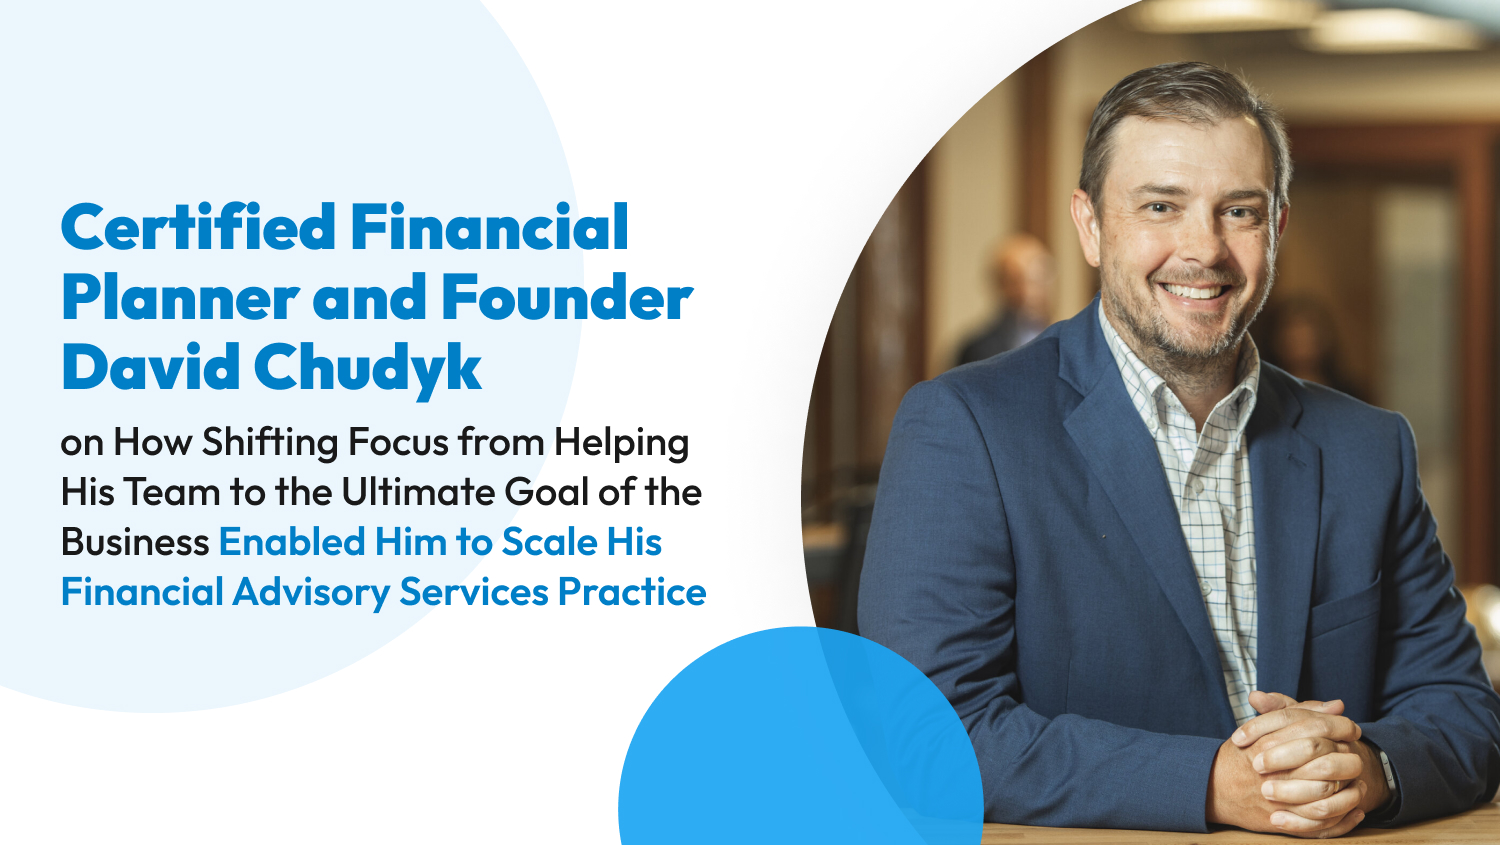 Certified Financial Planner and Founder David Chudyk